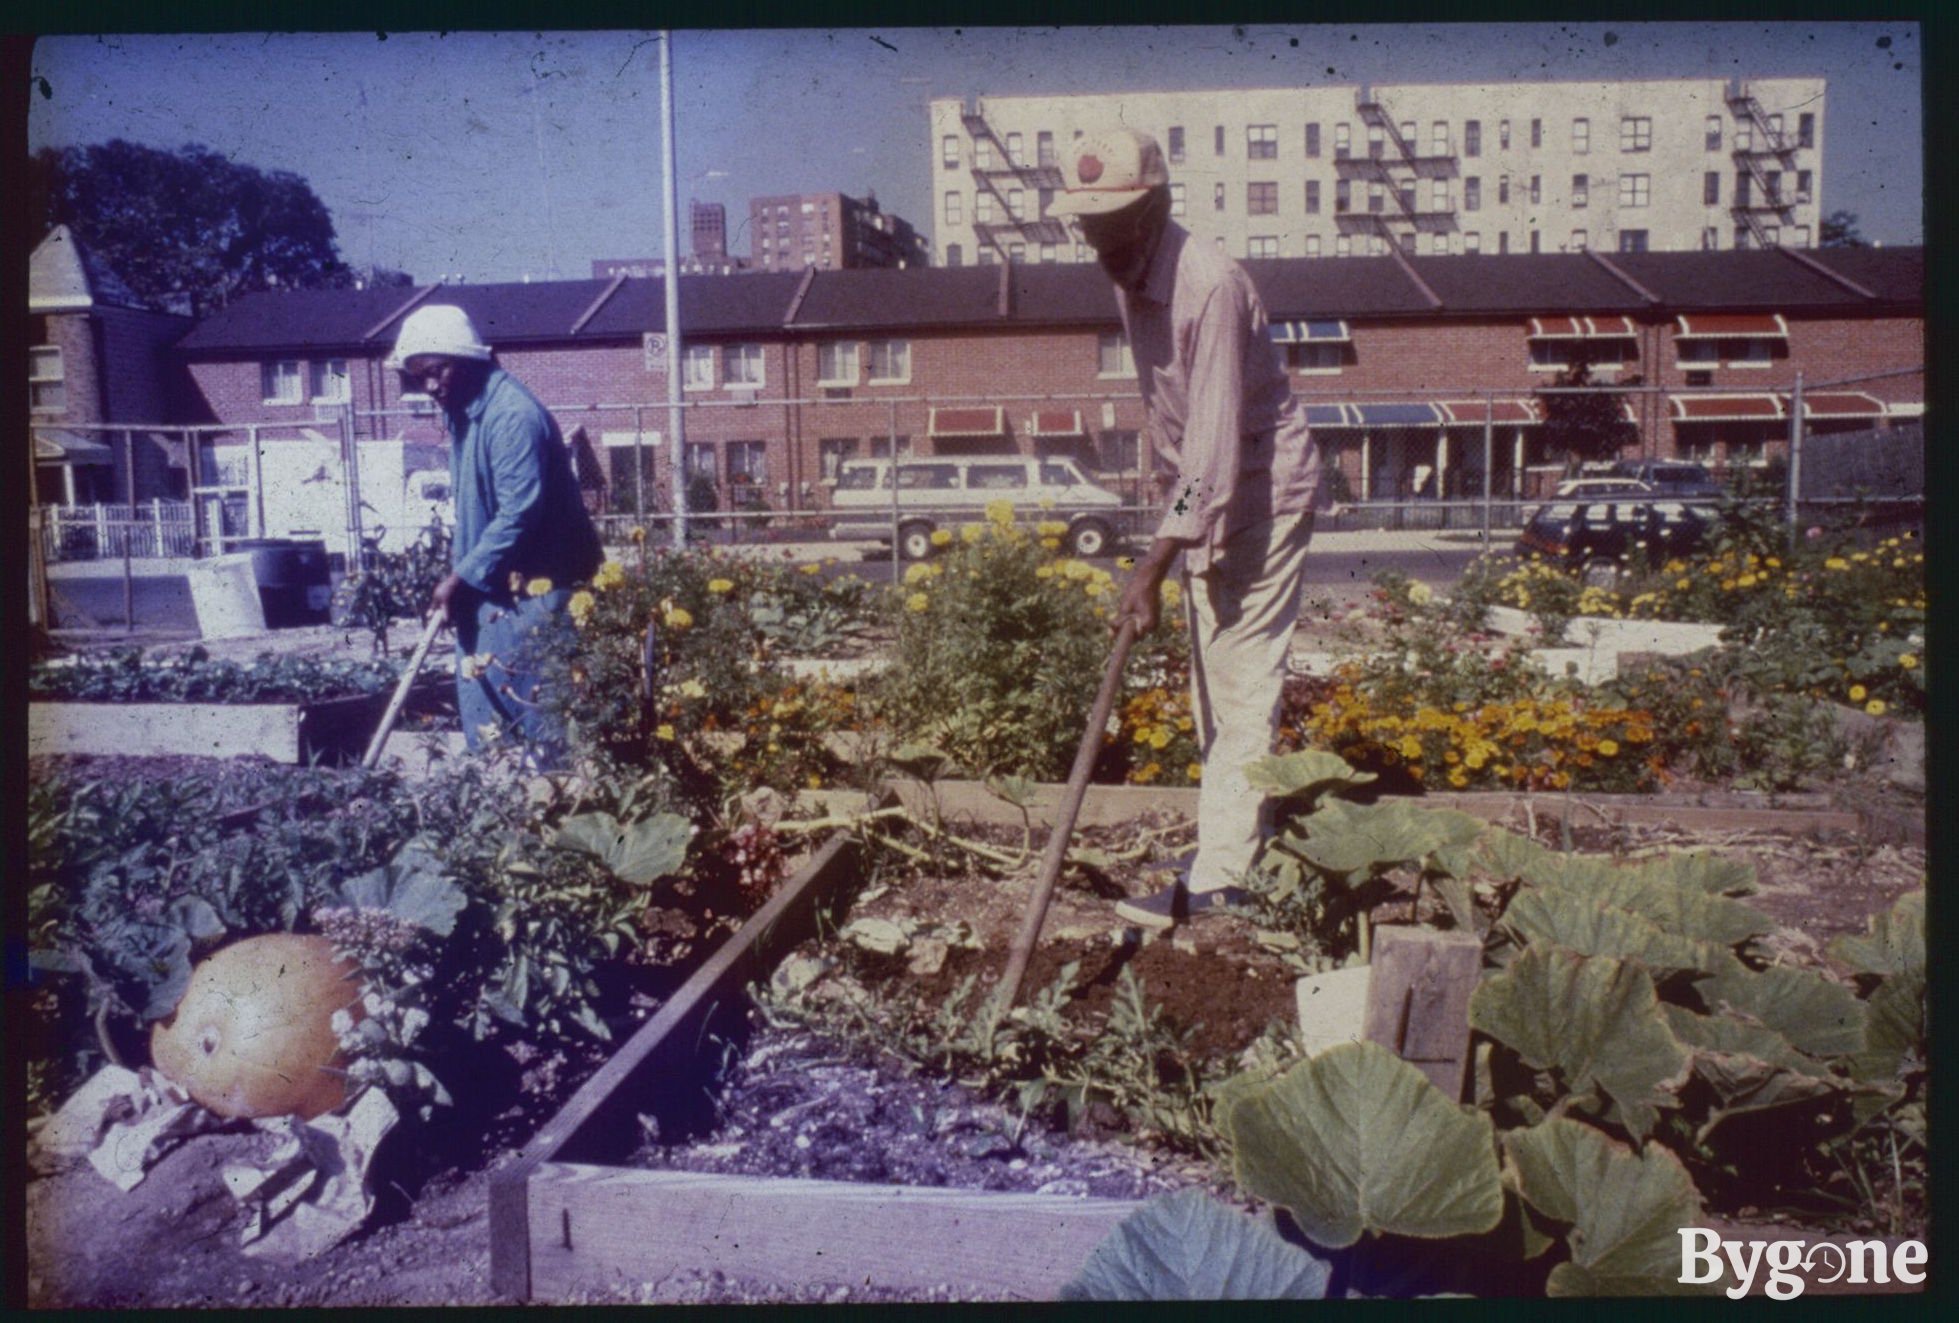 An allotment situated in an urban environment with a road and houses in the backdrop. There are large wooden planters bursting with a shower of orange and yellow flowers, various green herbs and plants. A tall Black man with patches of grey in his beard is tilling a herb planter in the centre of the frame. To the left there is a young Black man wearing double denim and a white hat tilling another planter, just in front, a very large round pumpkin is growing in the soil.